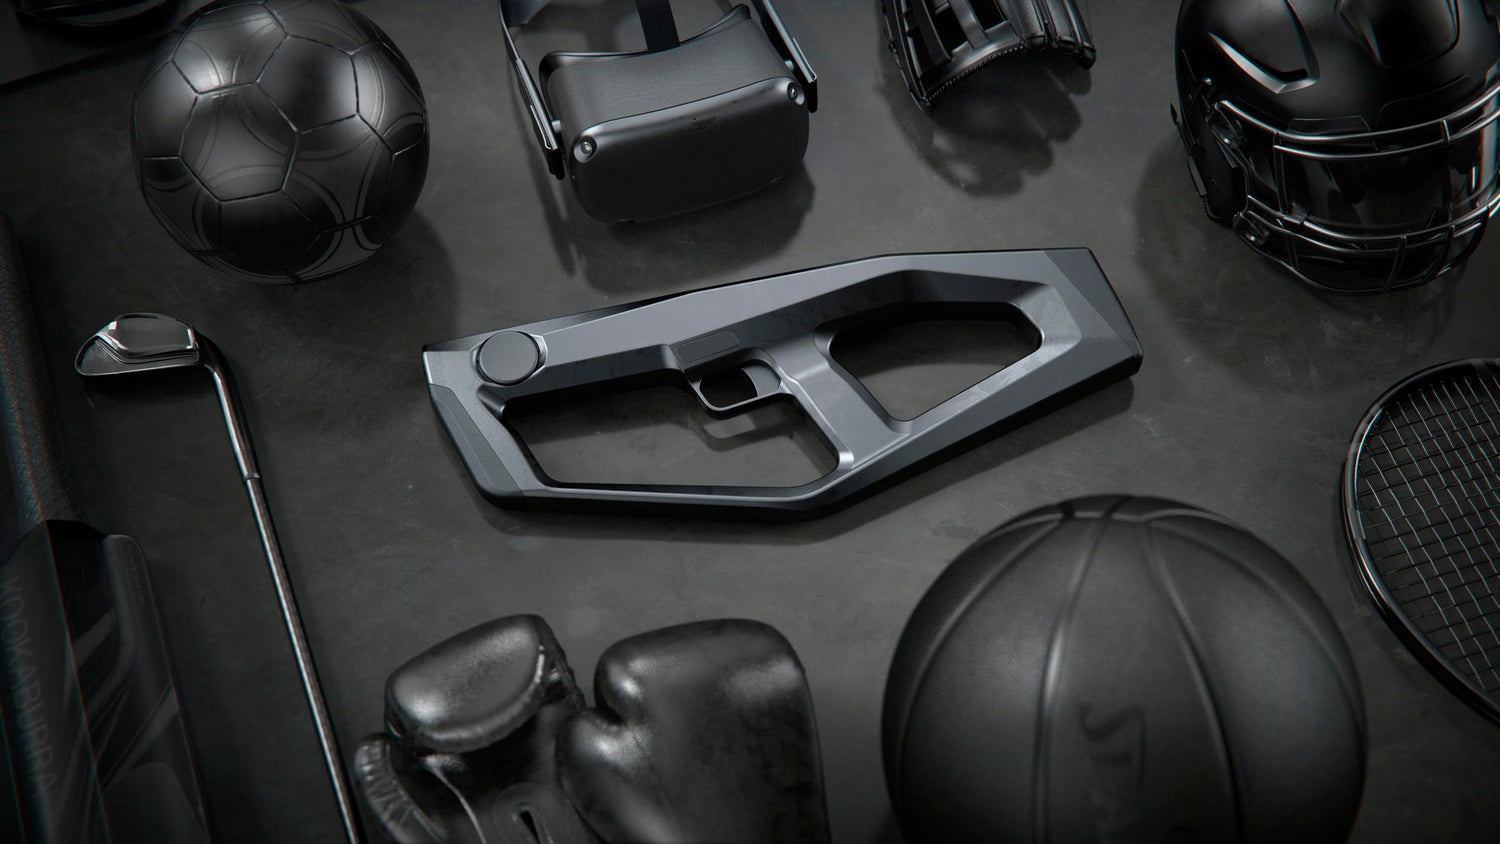 Striker VR Raises $4M to Bring Its Haptic VR Gun to Consumers – First Look